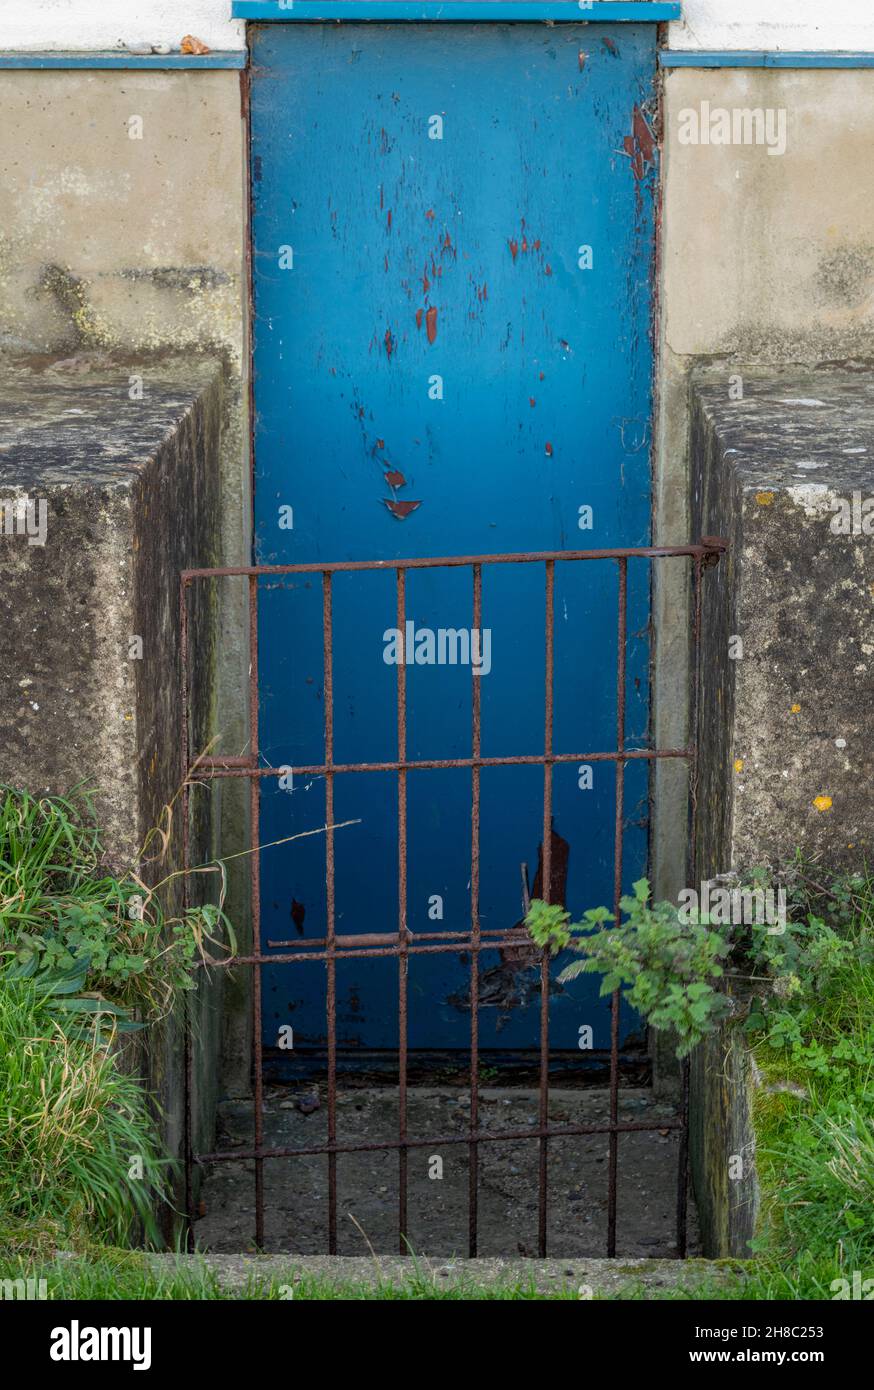 old iron gate and blue security door, rusty old garden gate and blue painted entrance door, back door or tradesman entrance to old fashioned property. Stock Photo